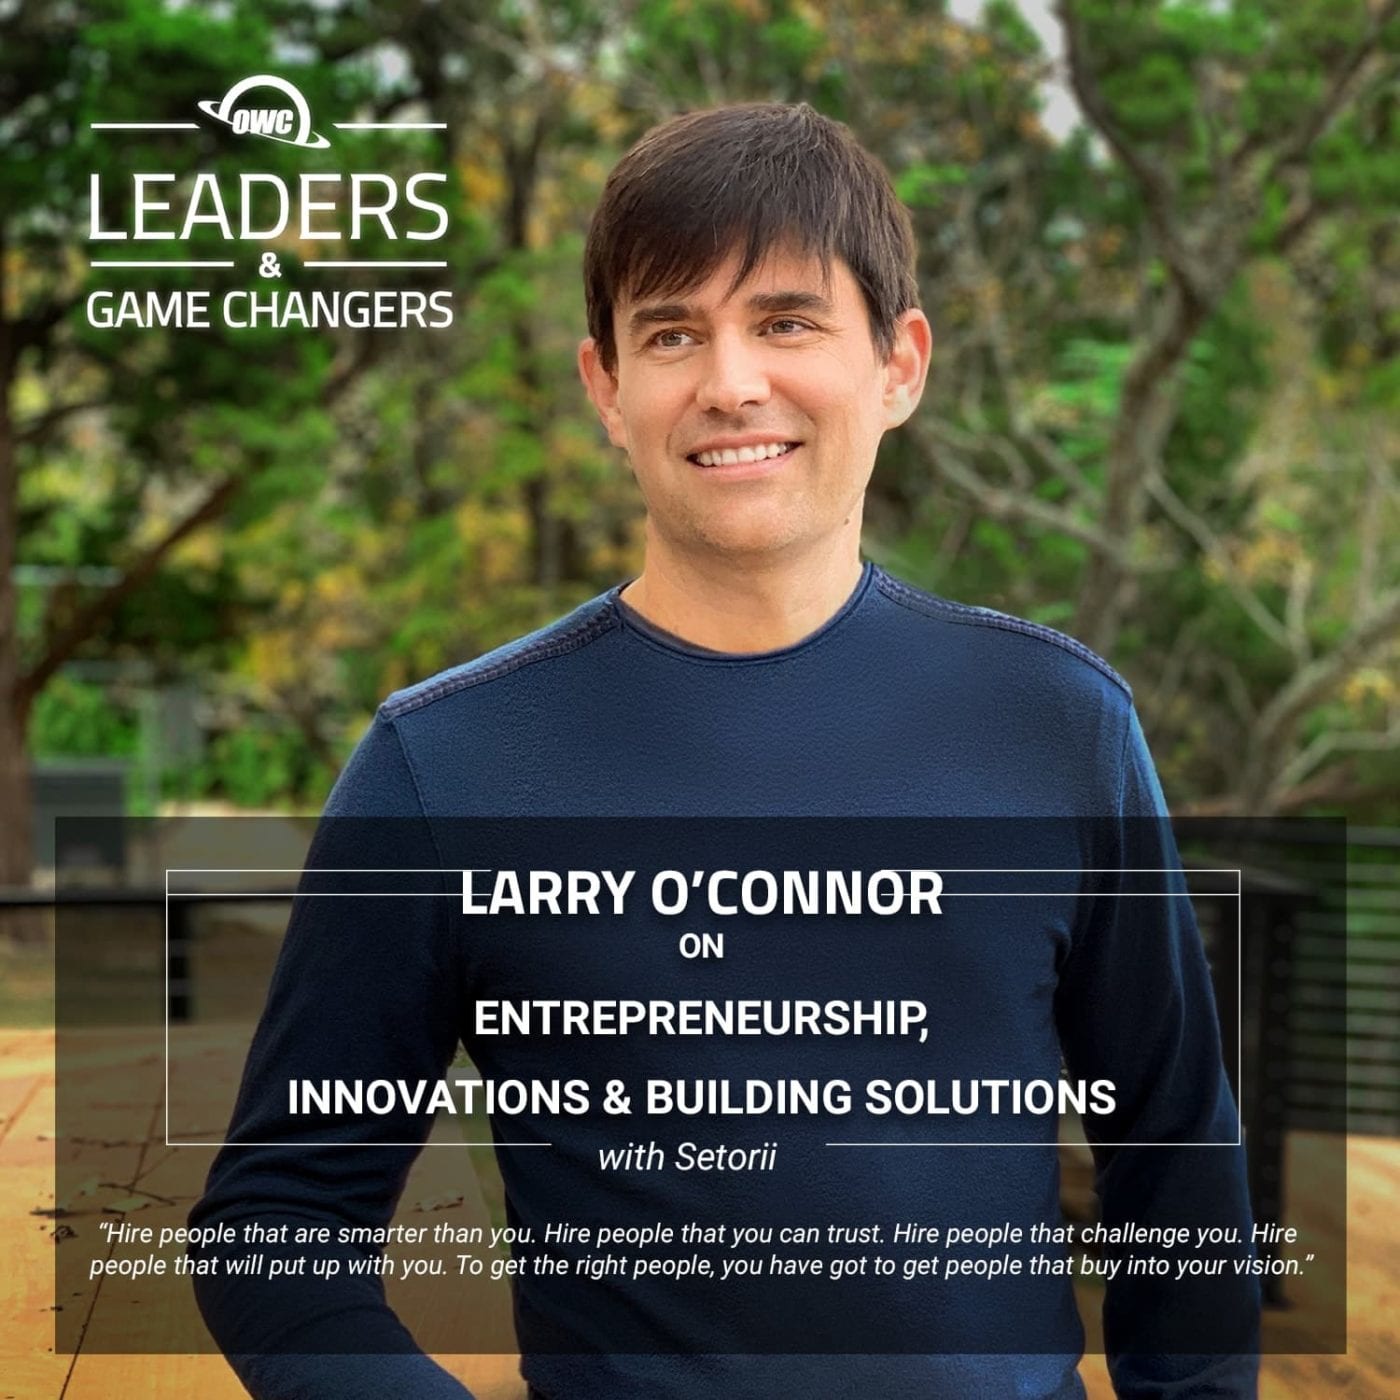 Larry O'Connor on OWC's Leaders & Game Changers podcast